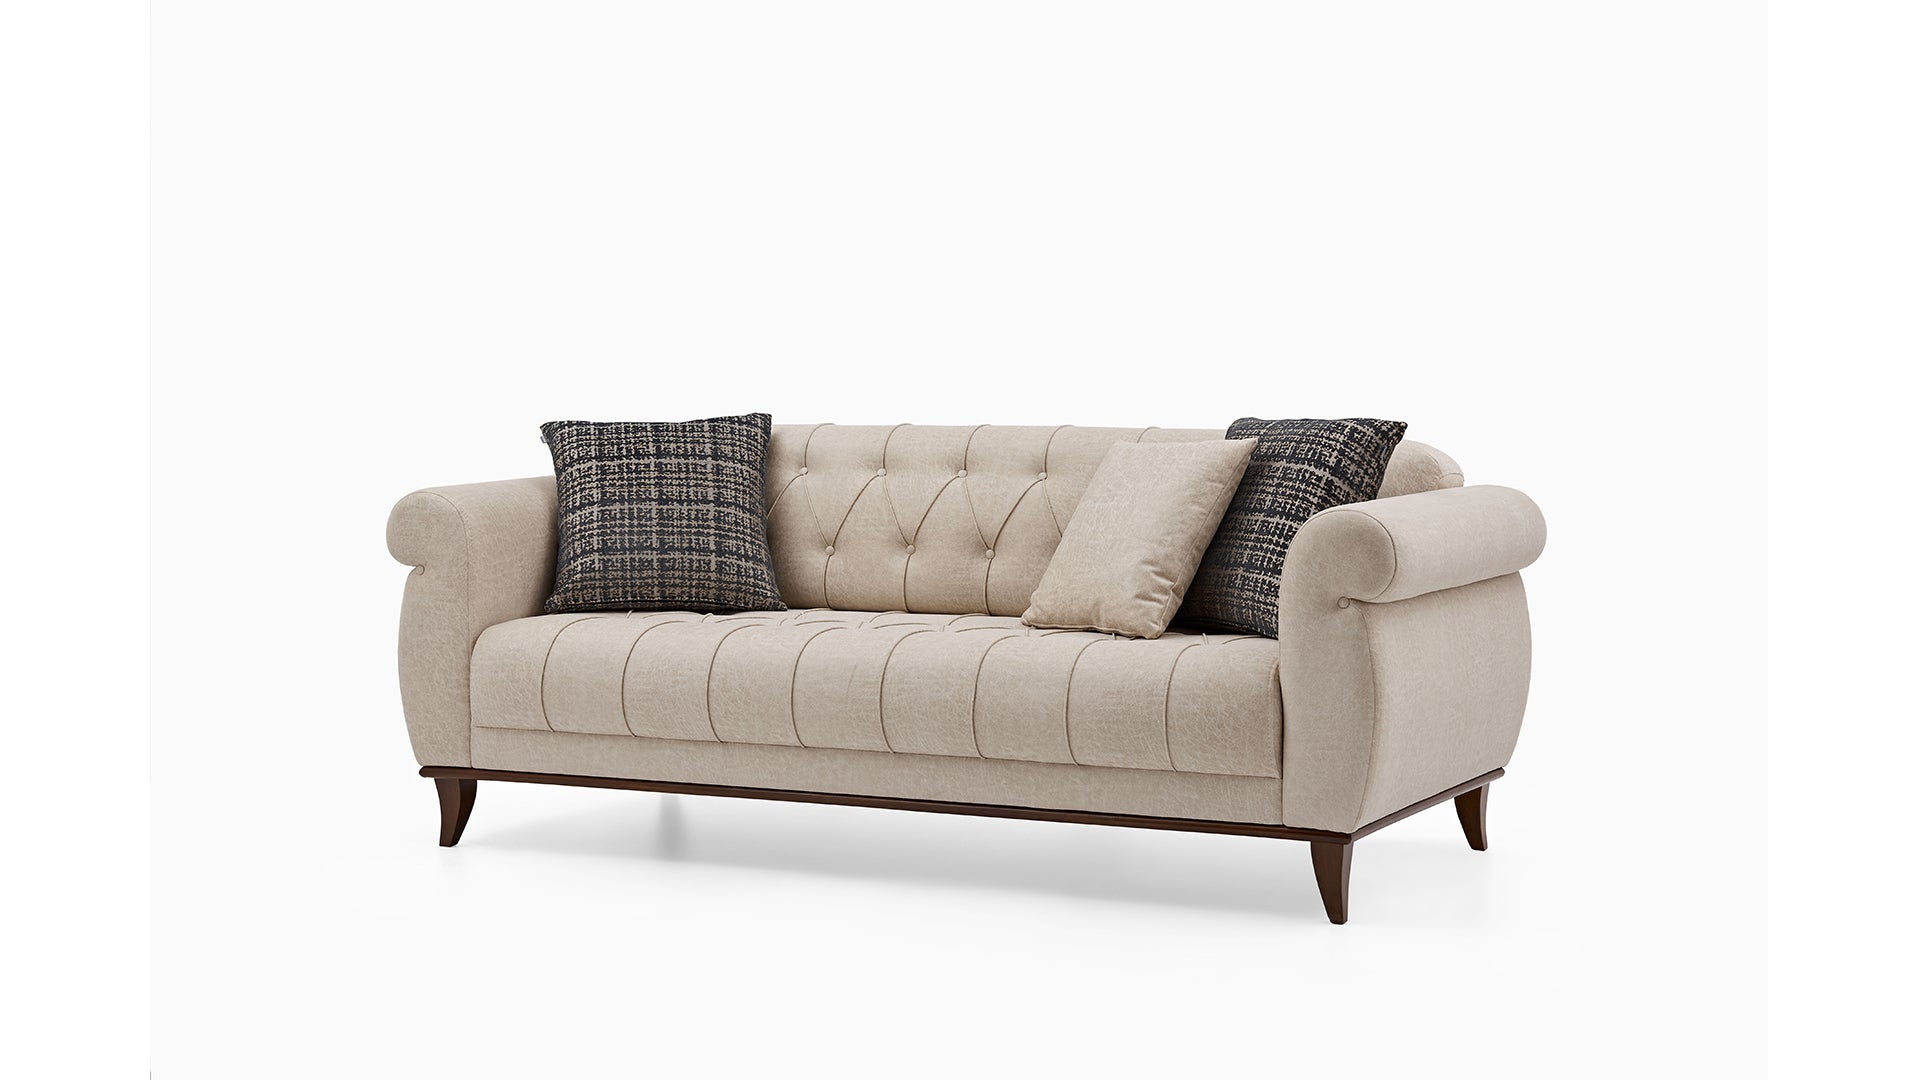 Riviera 2 Seater Sofa Bed